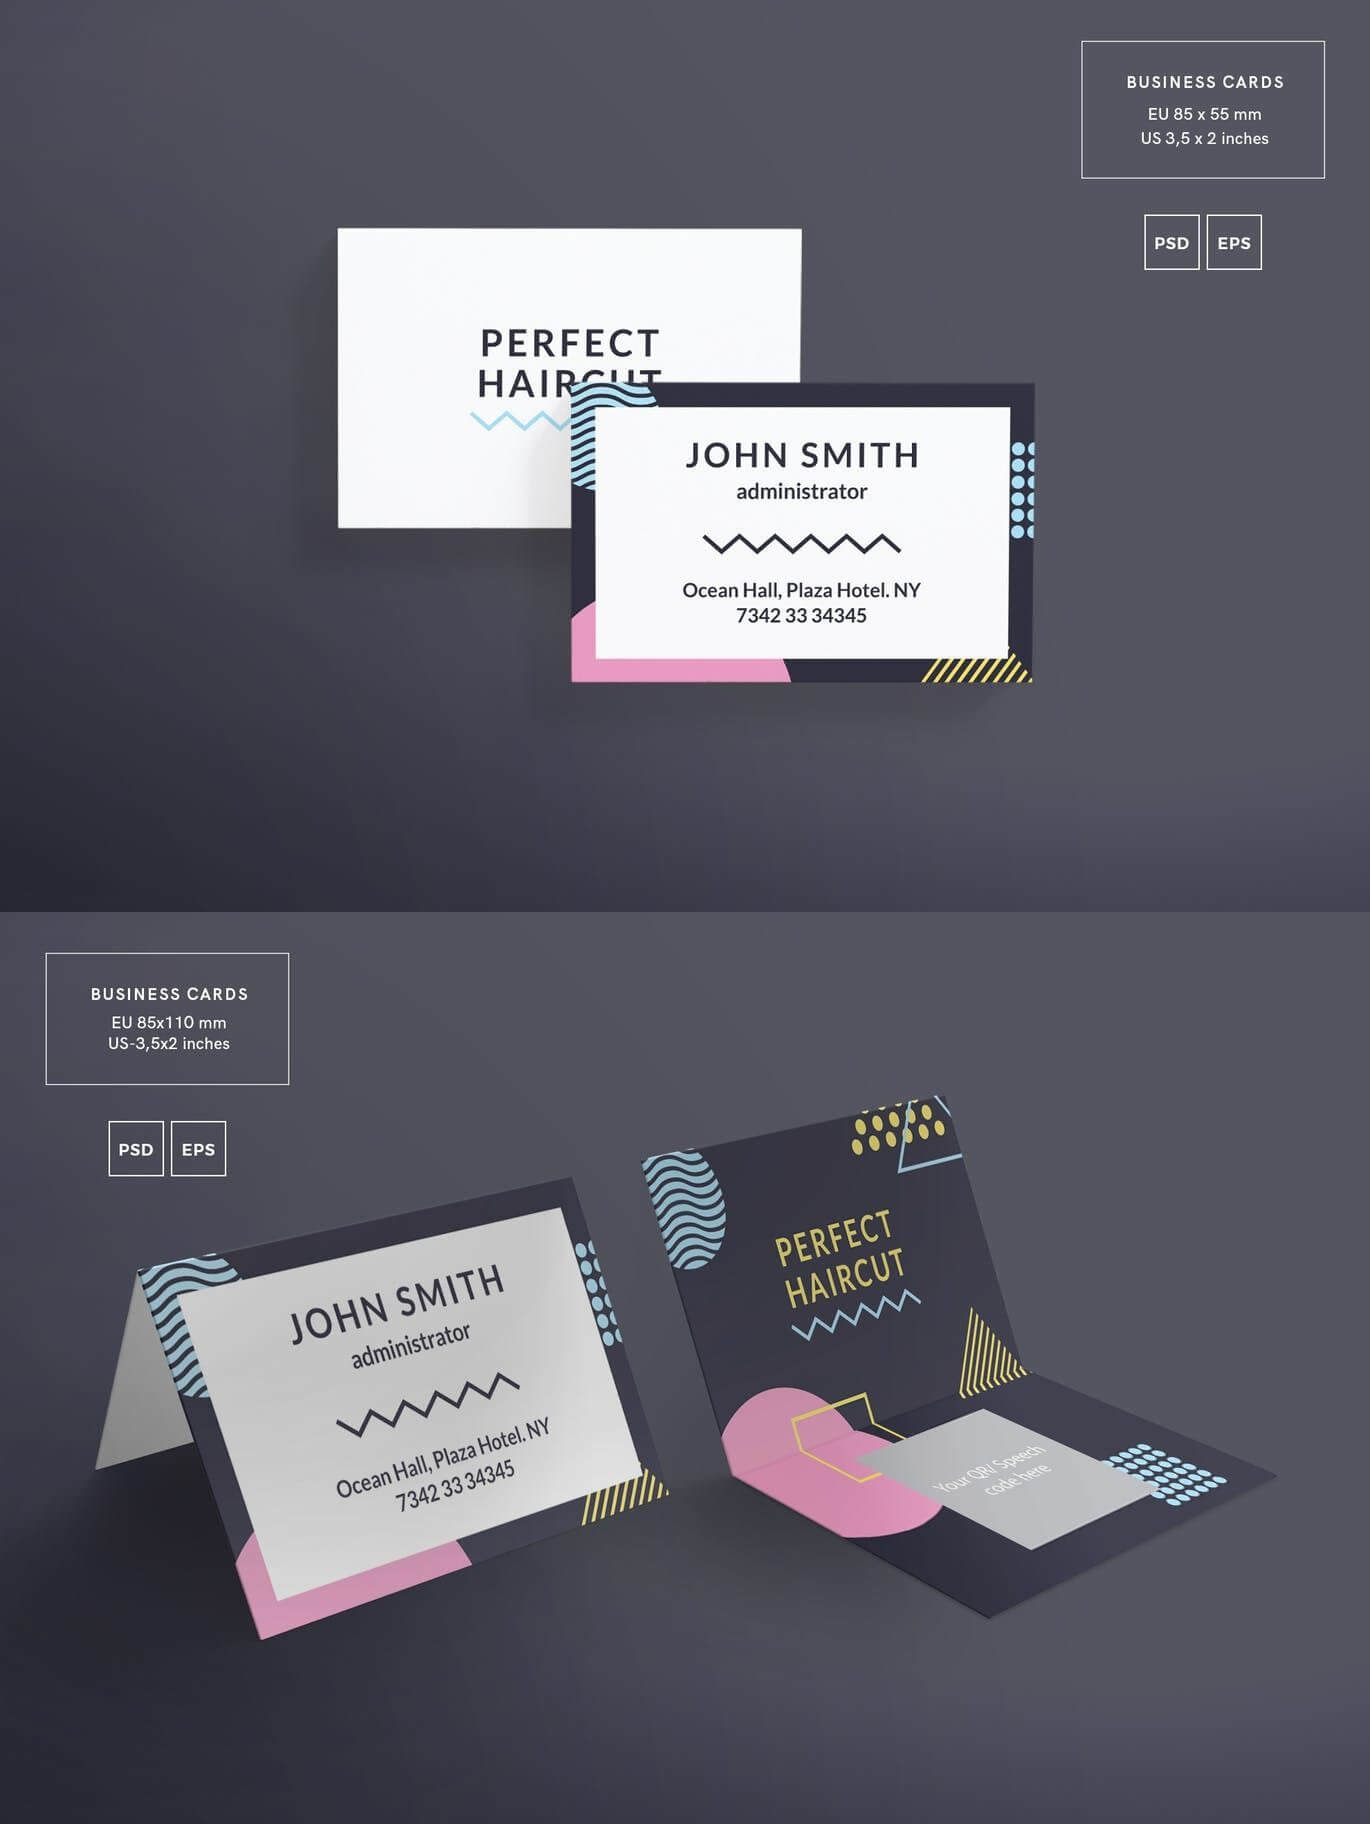 Haircut Masterclass Business Card Template — Adobe Photoshop Throughout Adobe Illustrator Card Template